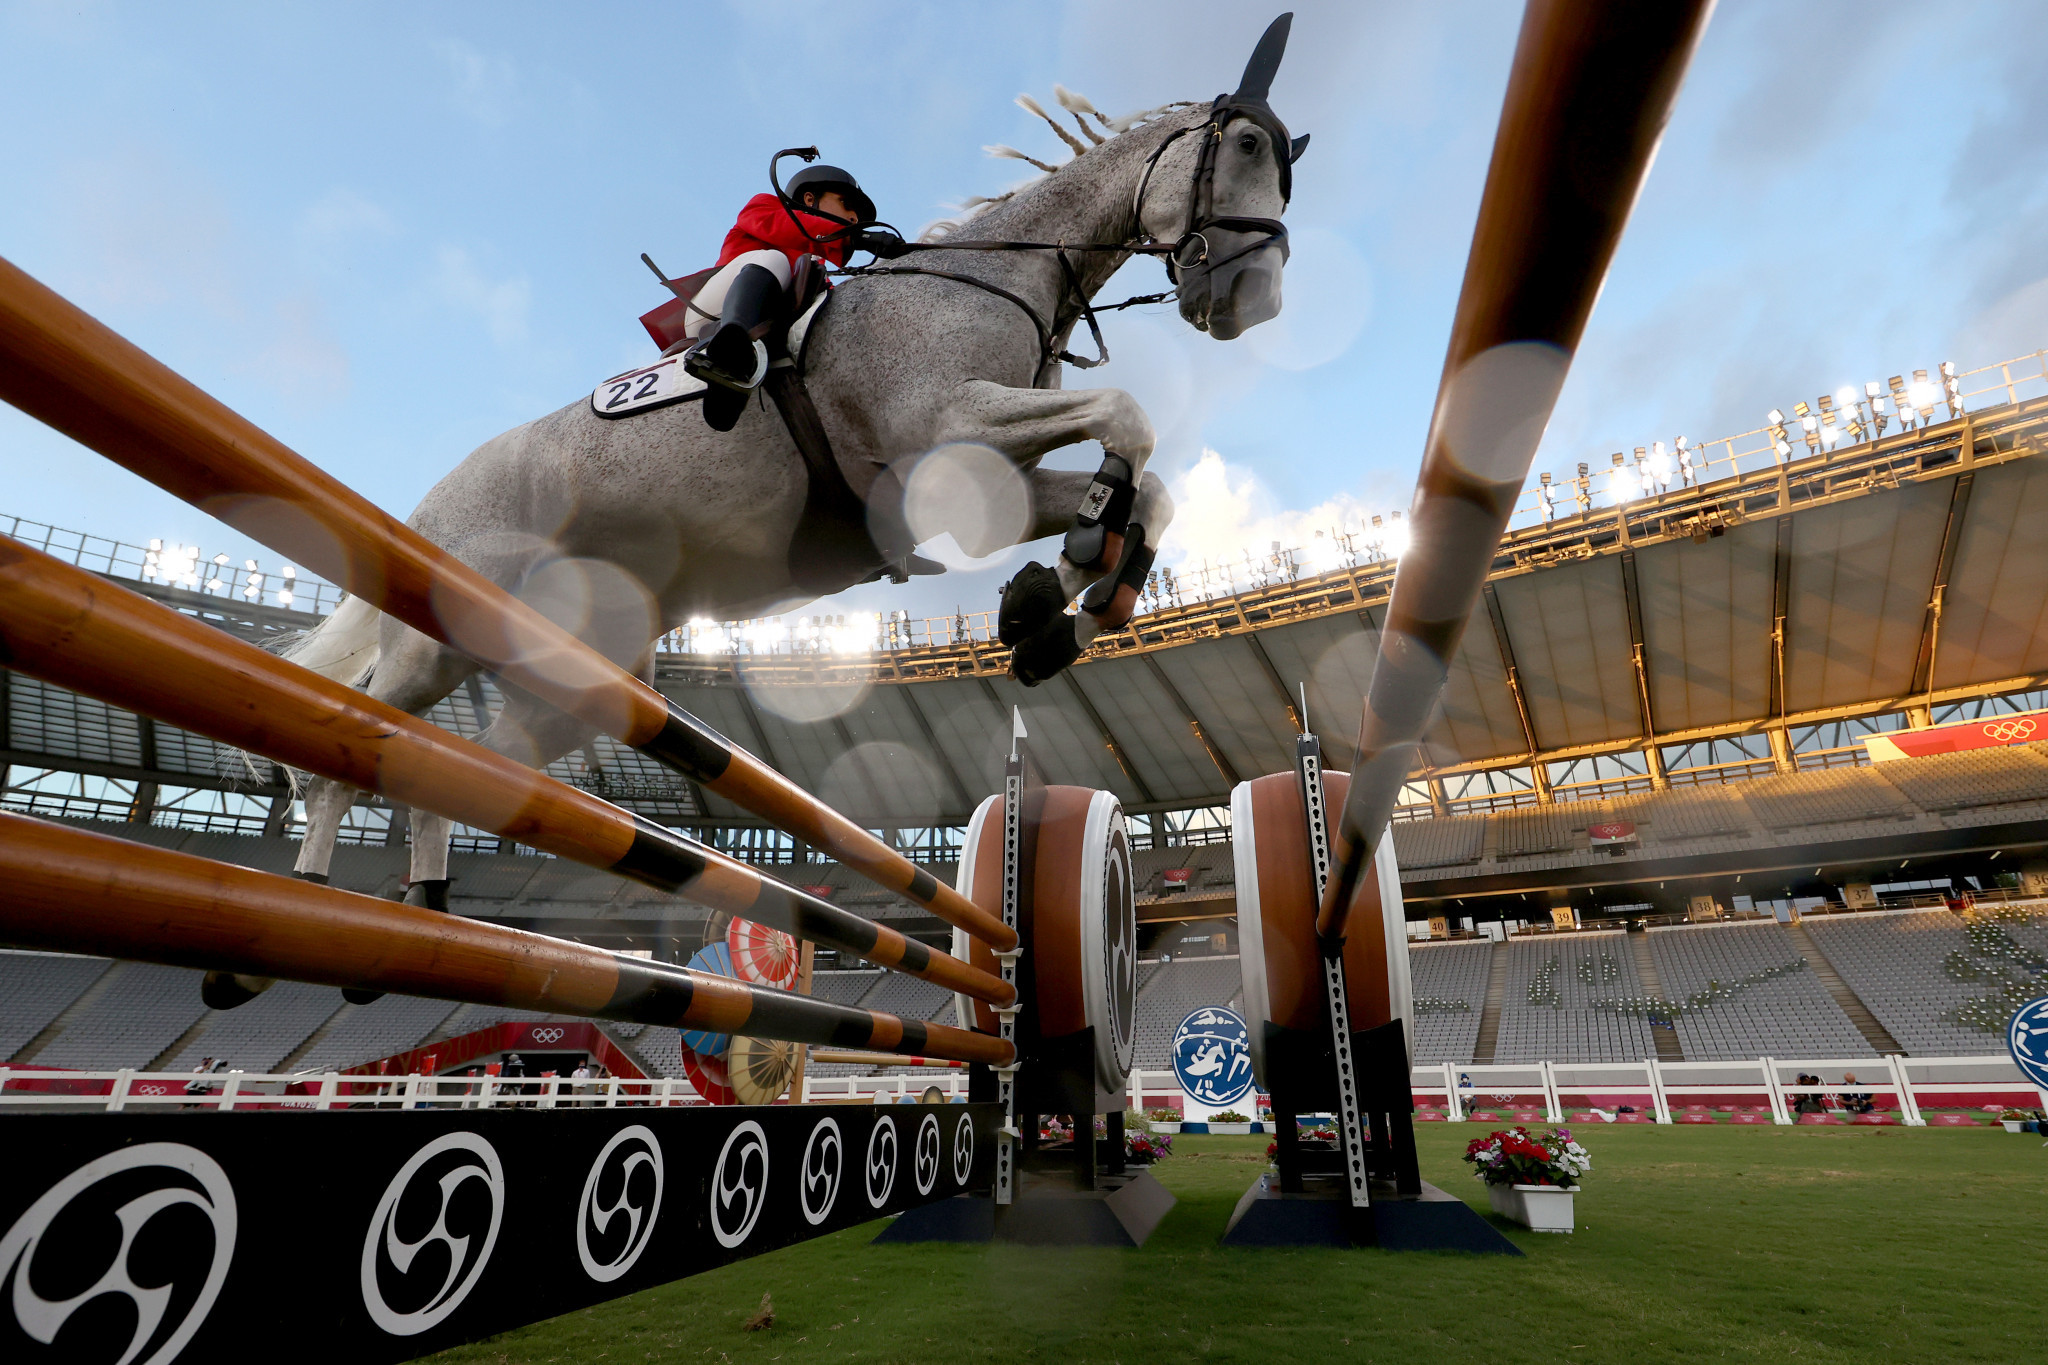 FEI President De Vos says sport working with modern pentathlon to help deliver successful jumping event at Paris 2024